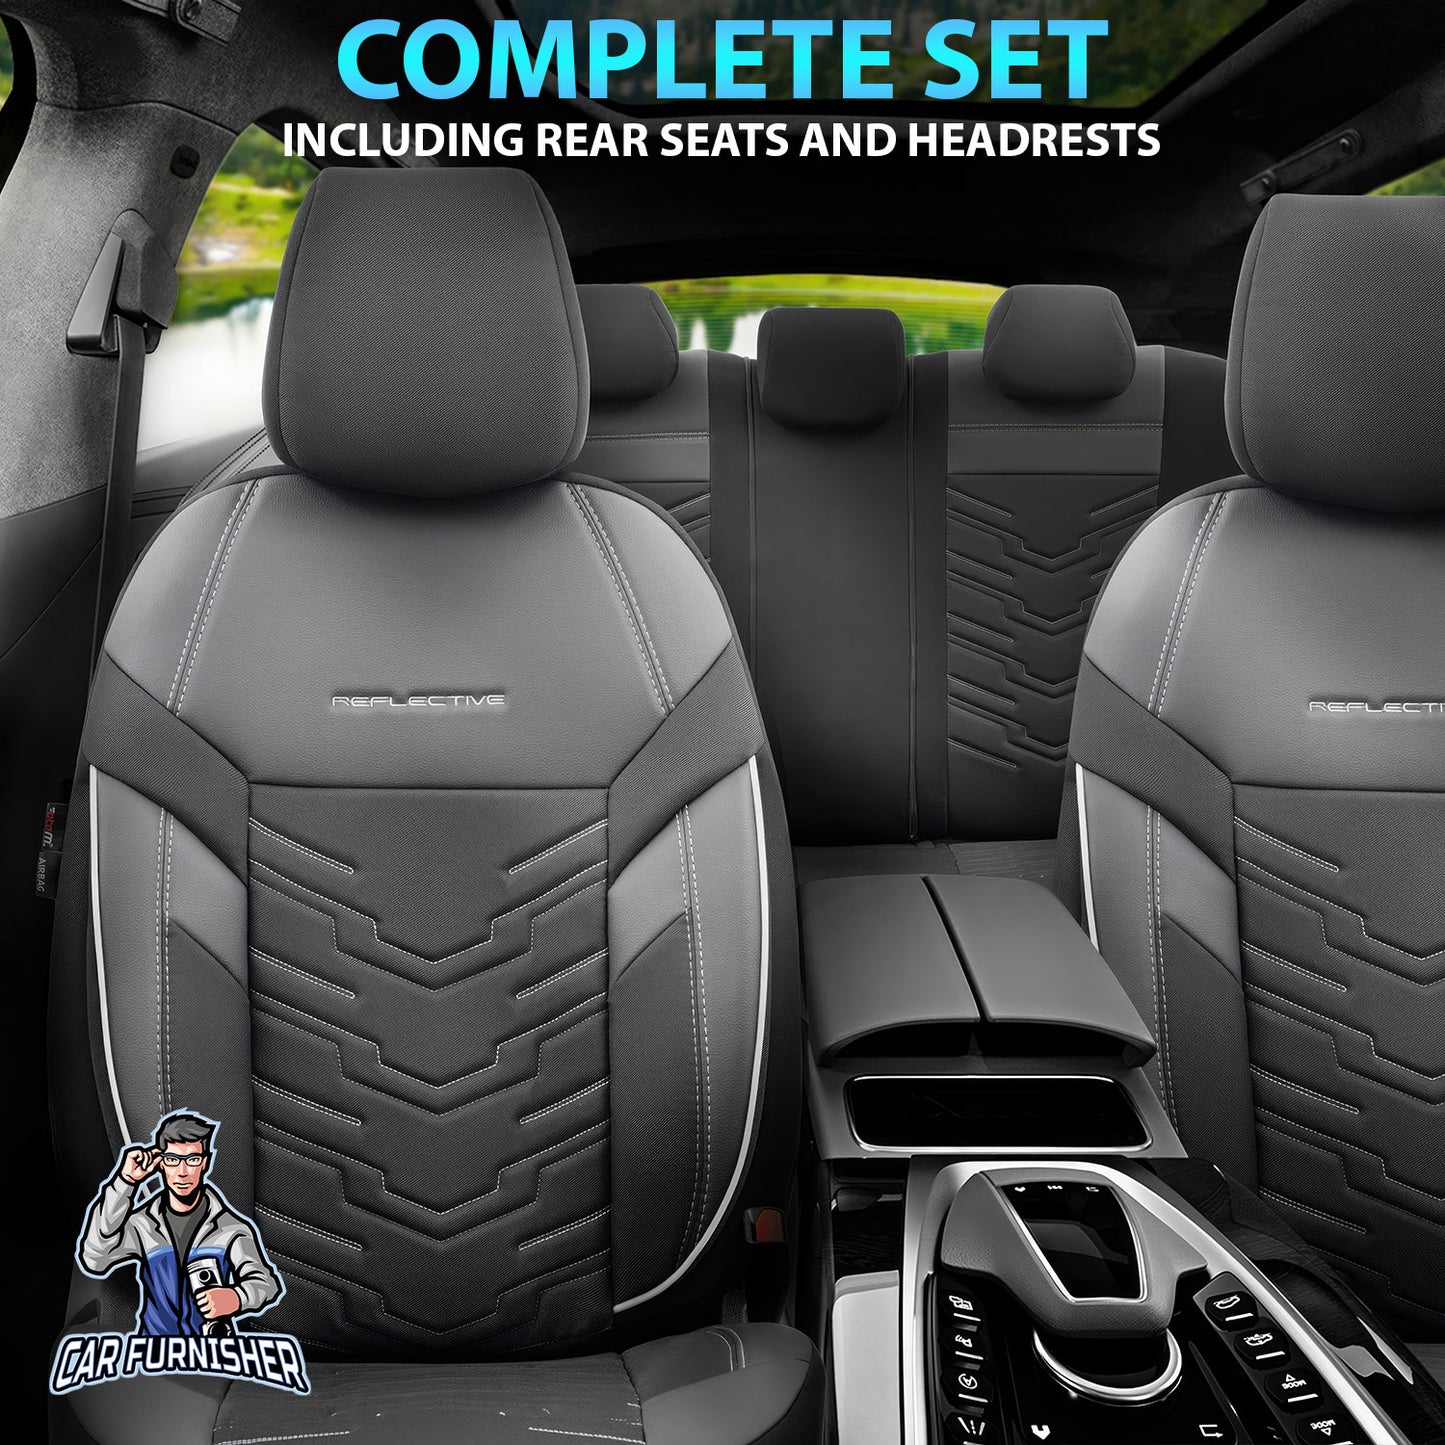 Car Seat Cover Set - Reflective Design Gray 5 Seats + Headrests (Full Set) Leather & Lacoste Fabric